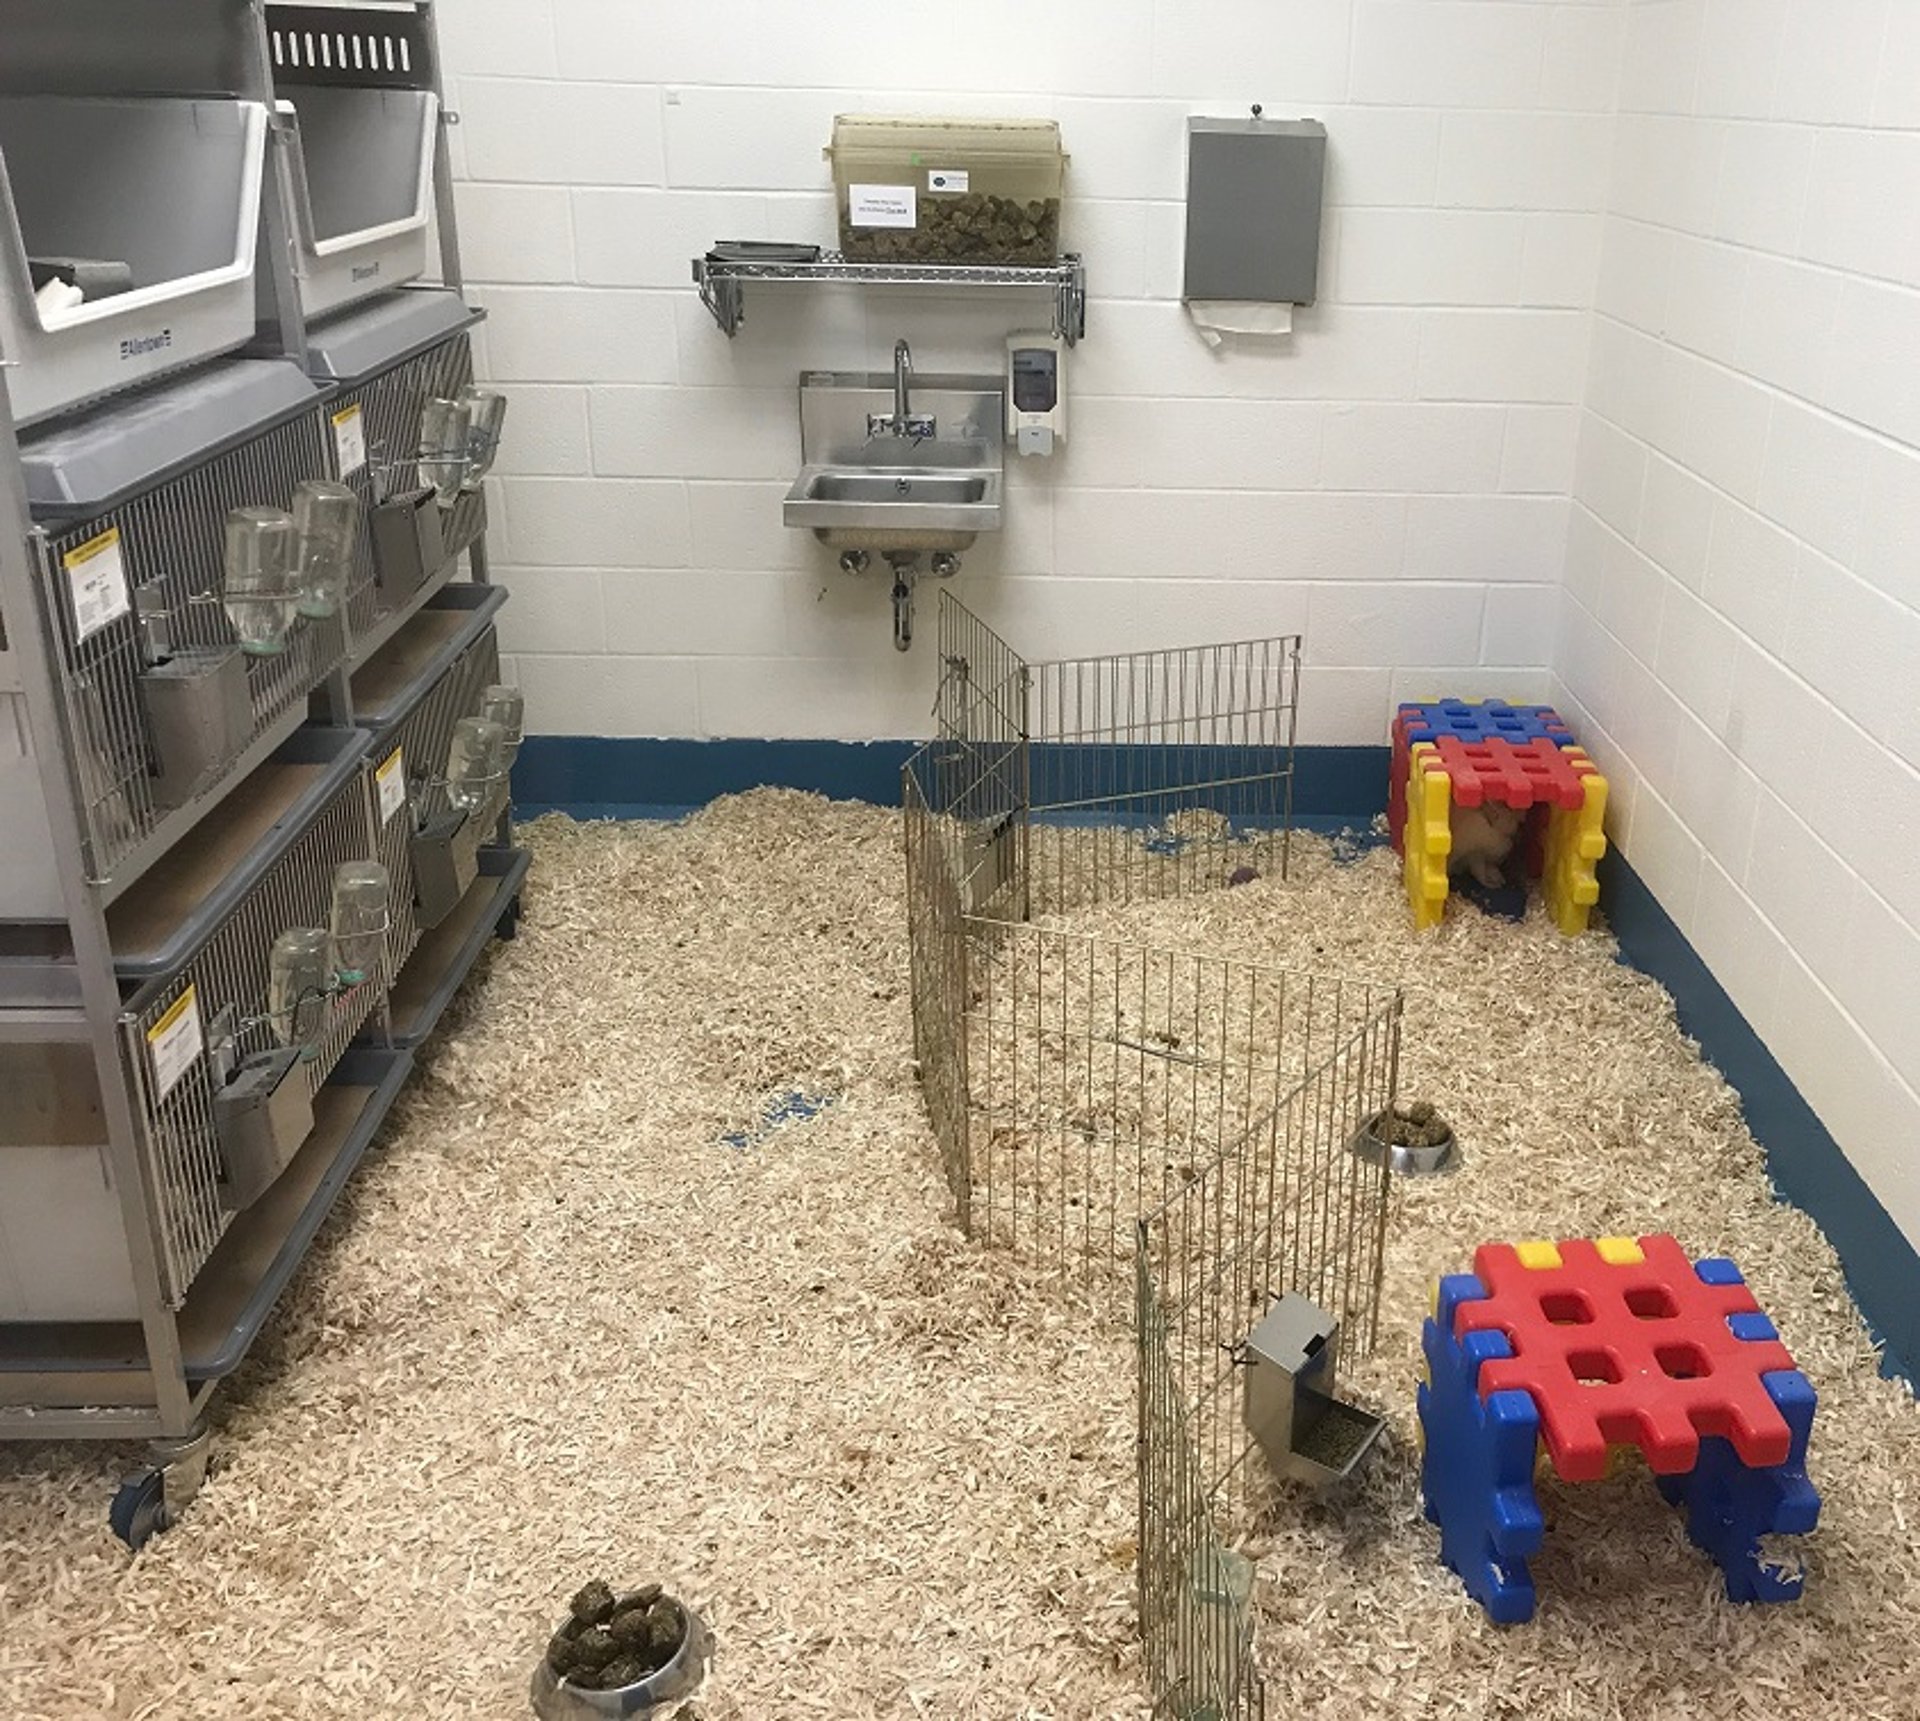 Group housing of rabbits in a research facility